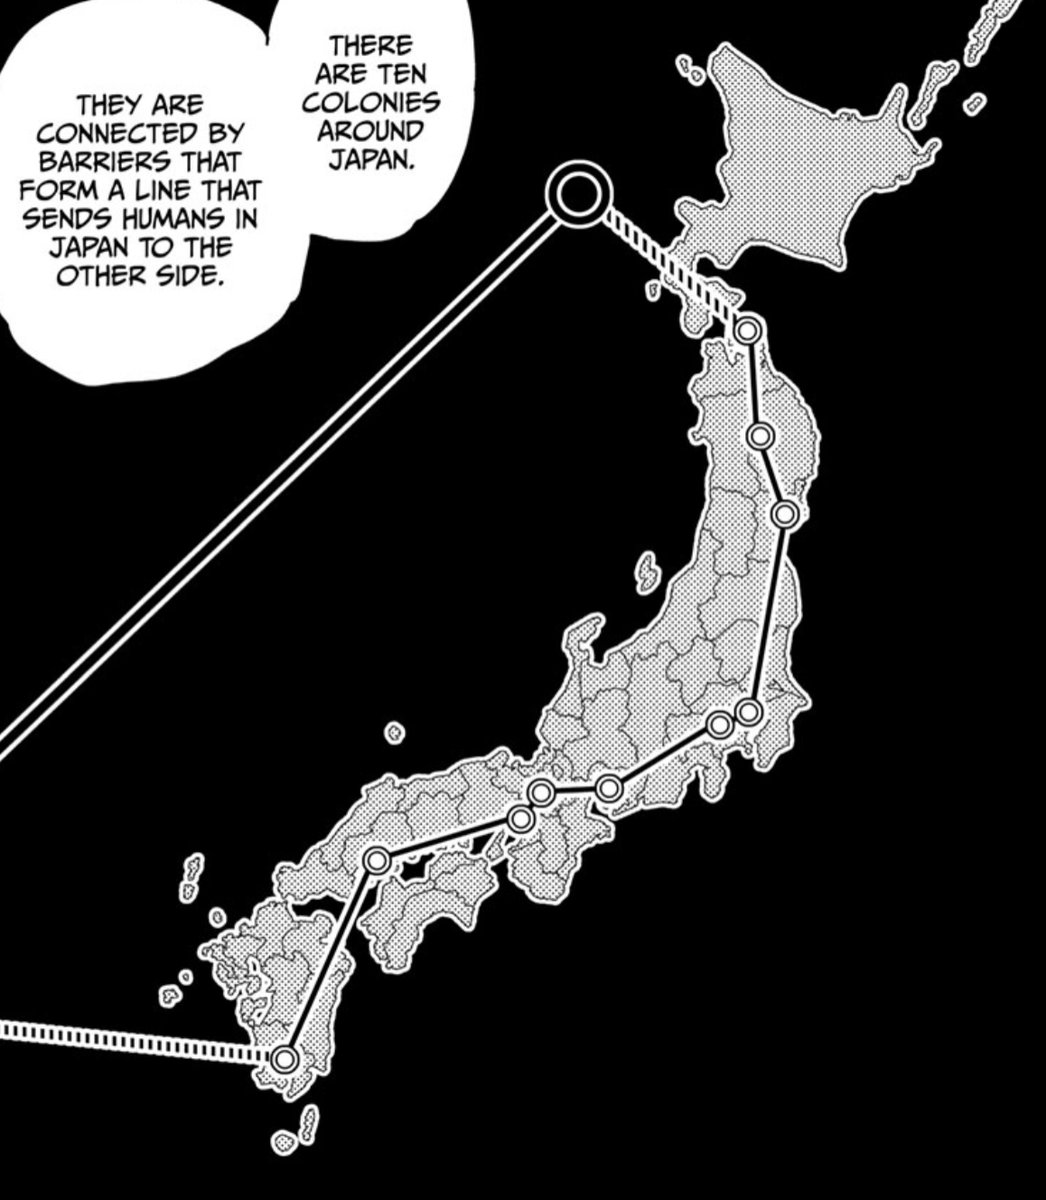 okay now onto the "other side" businessTengen states the 10 colonies (barriers) in which the Culling Game takes place are connected together to form a boundary—a line that would send the people in Japan to "the other side" / higan / 彼岸  #呪術バレ